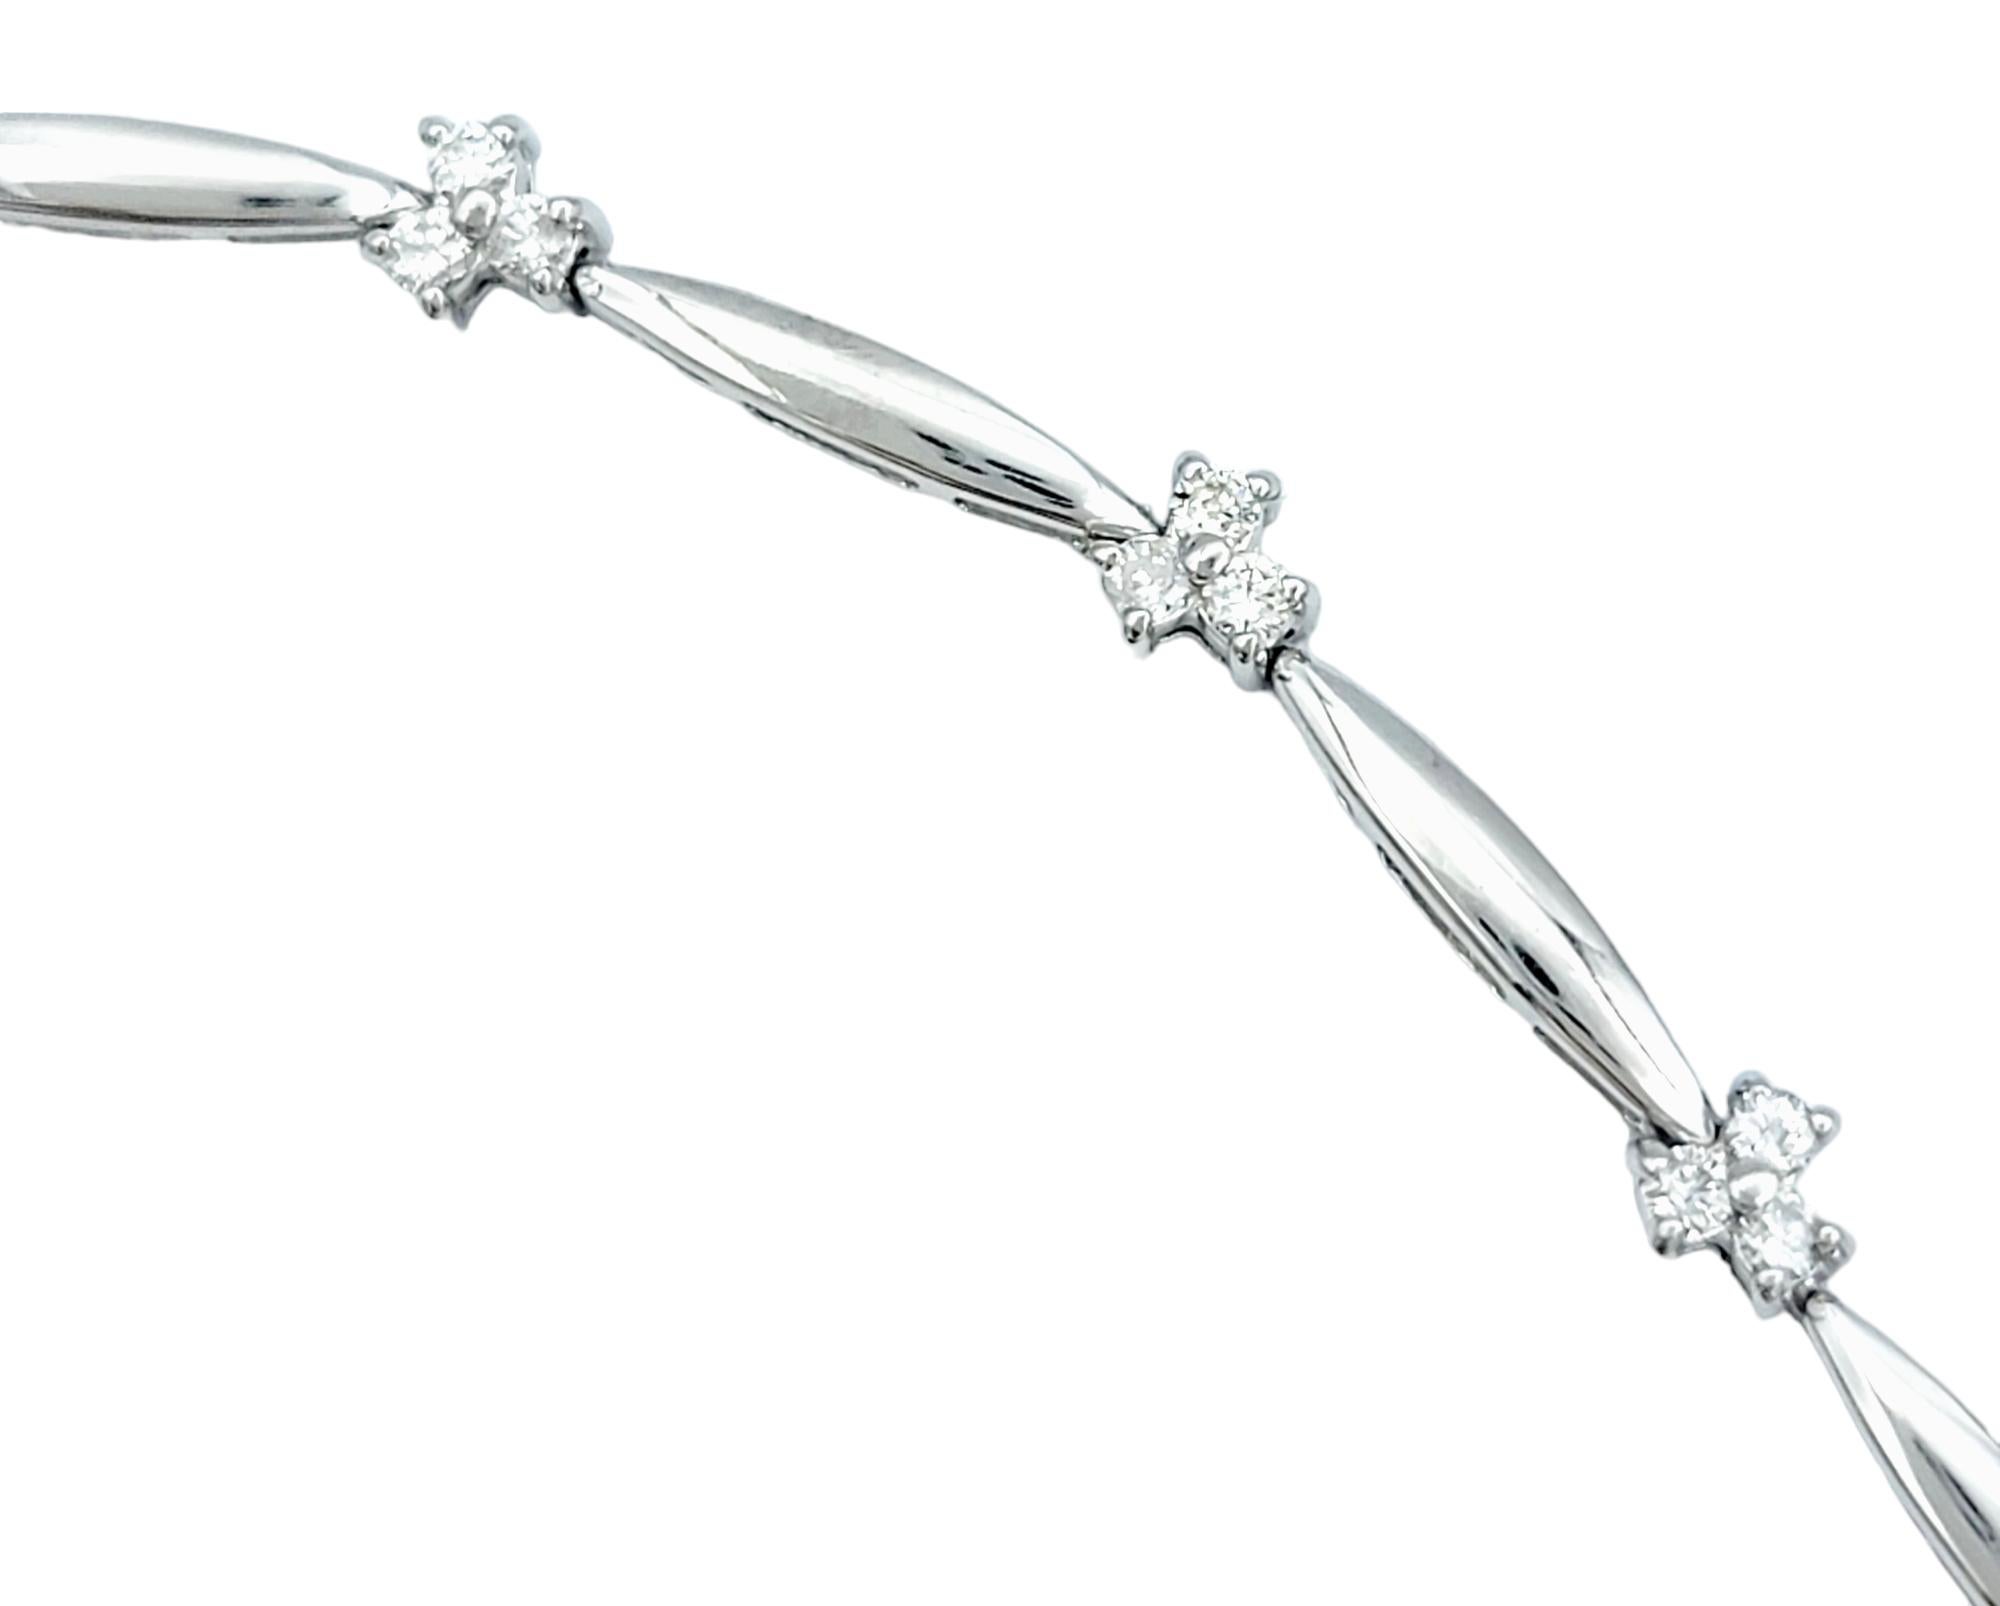 The inner circumference of this bracelet measures 6.88 inches and will comfortably fit a 6.5 inch wrist. 

This stunning narrow link bracelet exudes timeless elegance and versatility. Its design is a masterful blend of sophistication and simplicity,